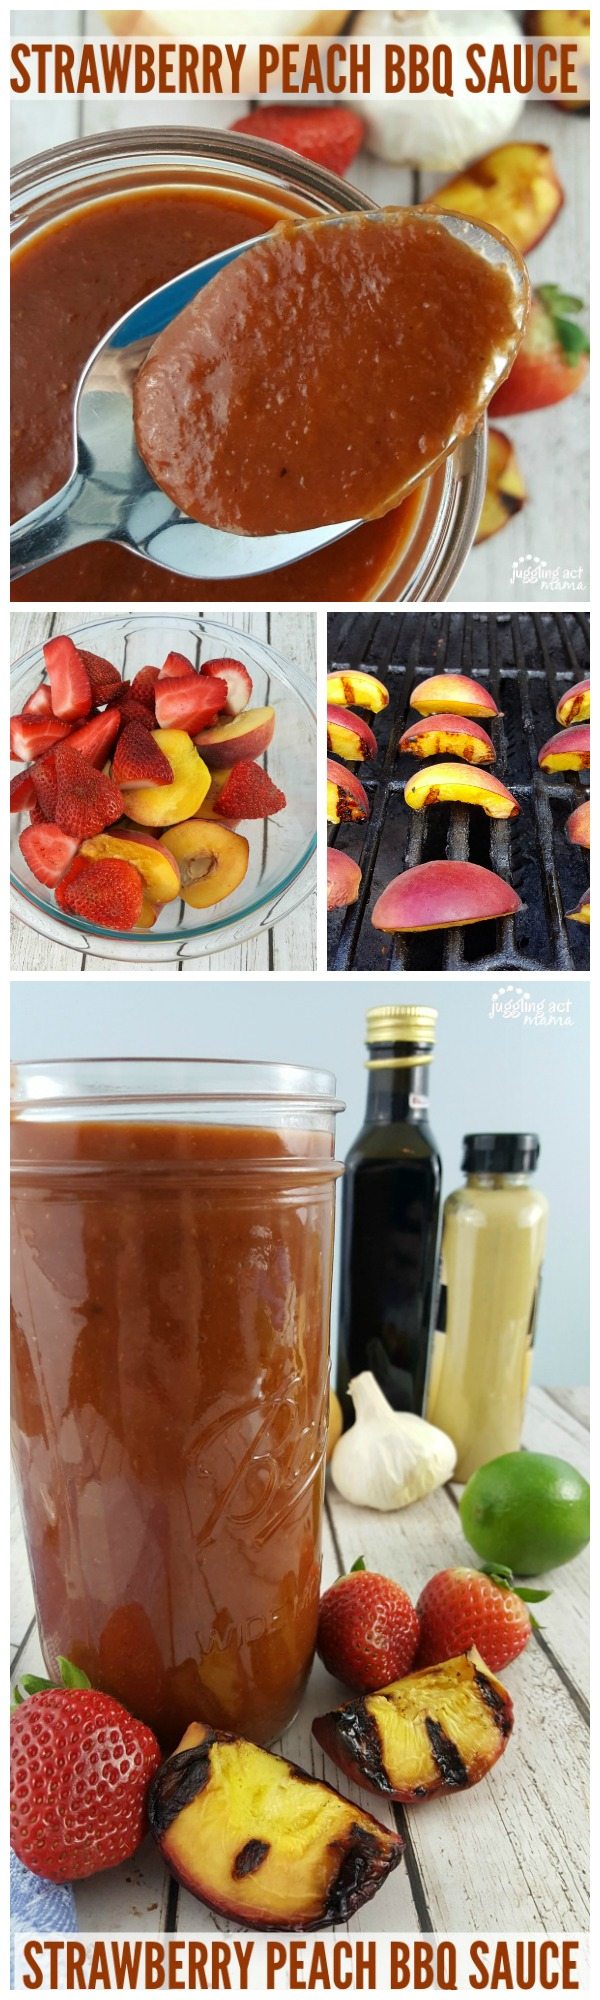 A collage of images showing the ingredients and part of the process for making Strawberry Peach BBQ Sauce. One image shows a spoonful of BBQ sauce resting on a mason jar. Another shows peach quarters on a grill. An image of strawberries and peaches in a glass bowl is shown. Finally there is an image of a tall mason jar full of BBQ sauce, surrounded by ingredients, including a head of garlic, a whole lime, strawberries and grilled peaches. In the background are bottles of mustard and balsamic vinegar.